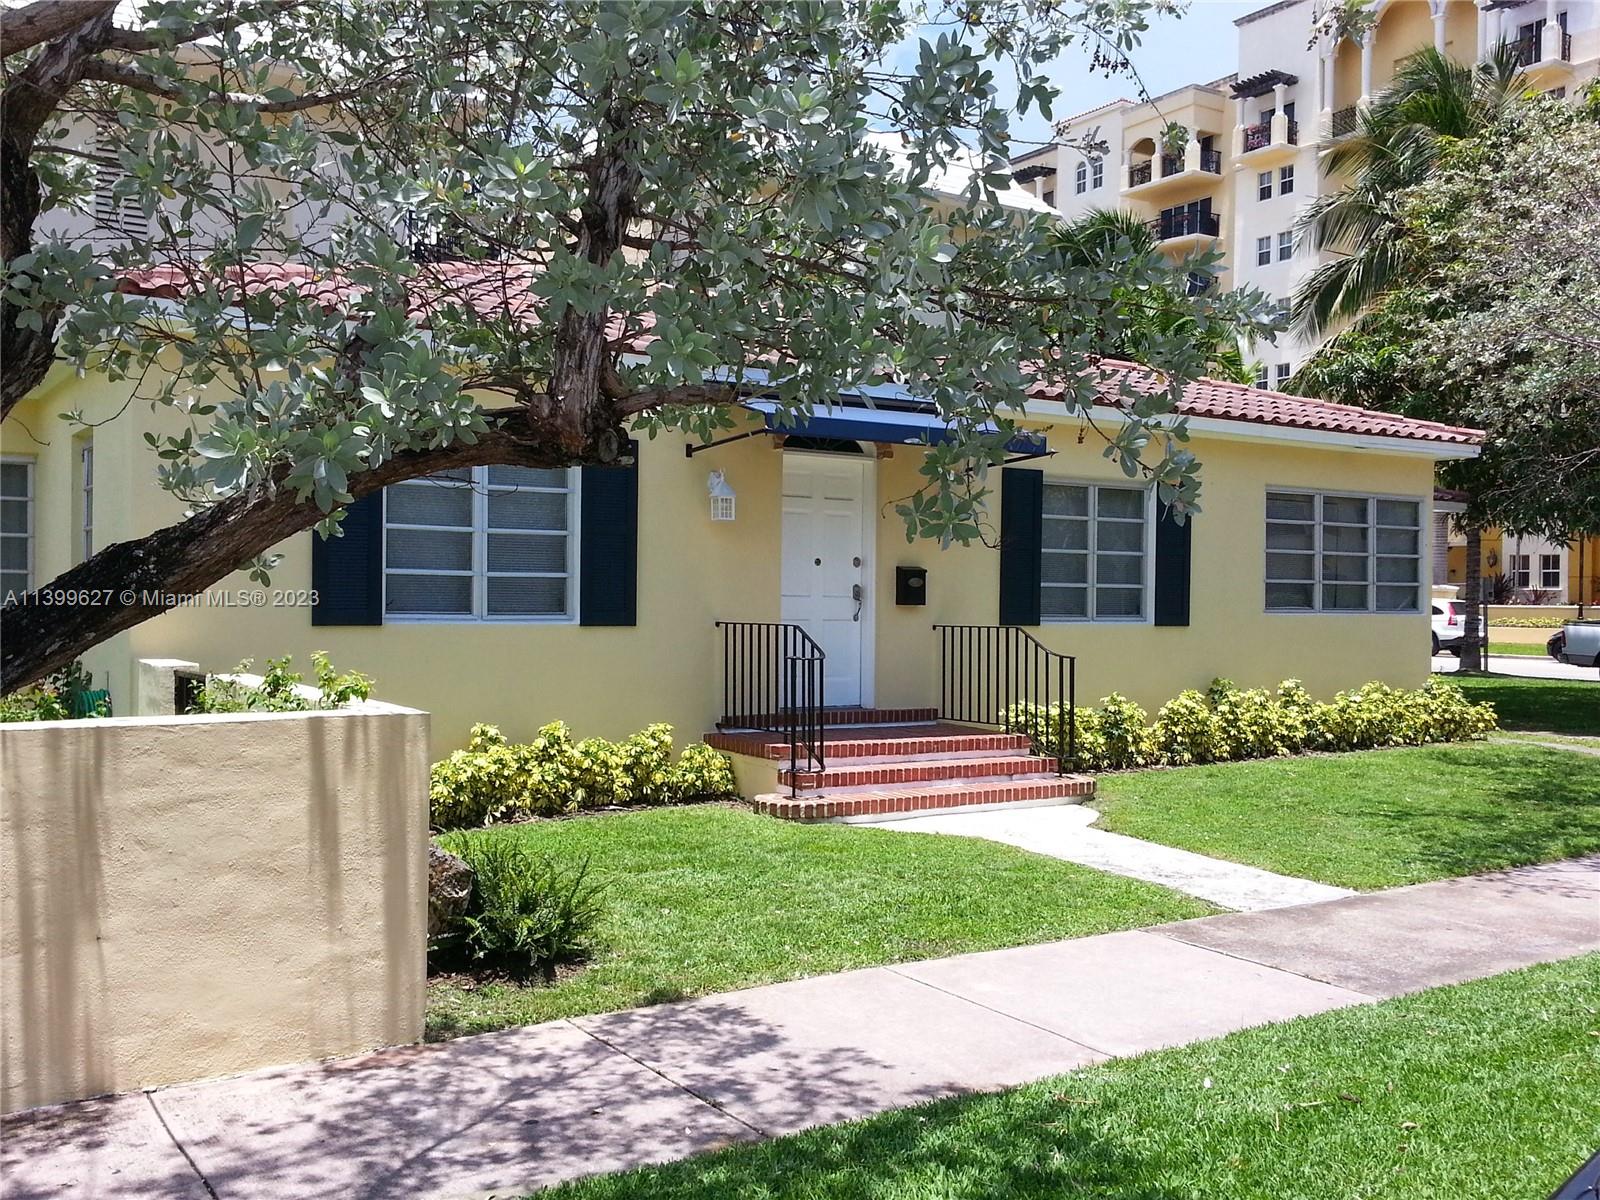 Homes for rent in Coral Gables | View 1300 Galiano St | 2 Beds, 1 Bath